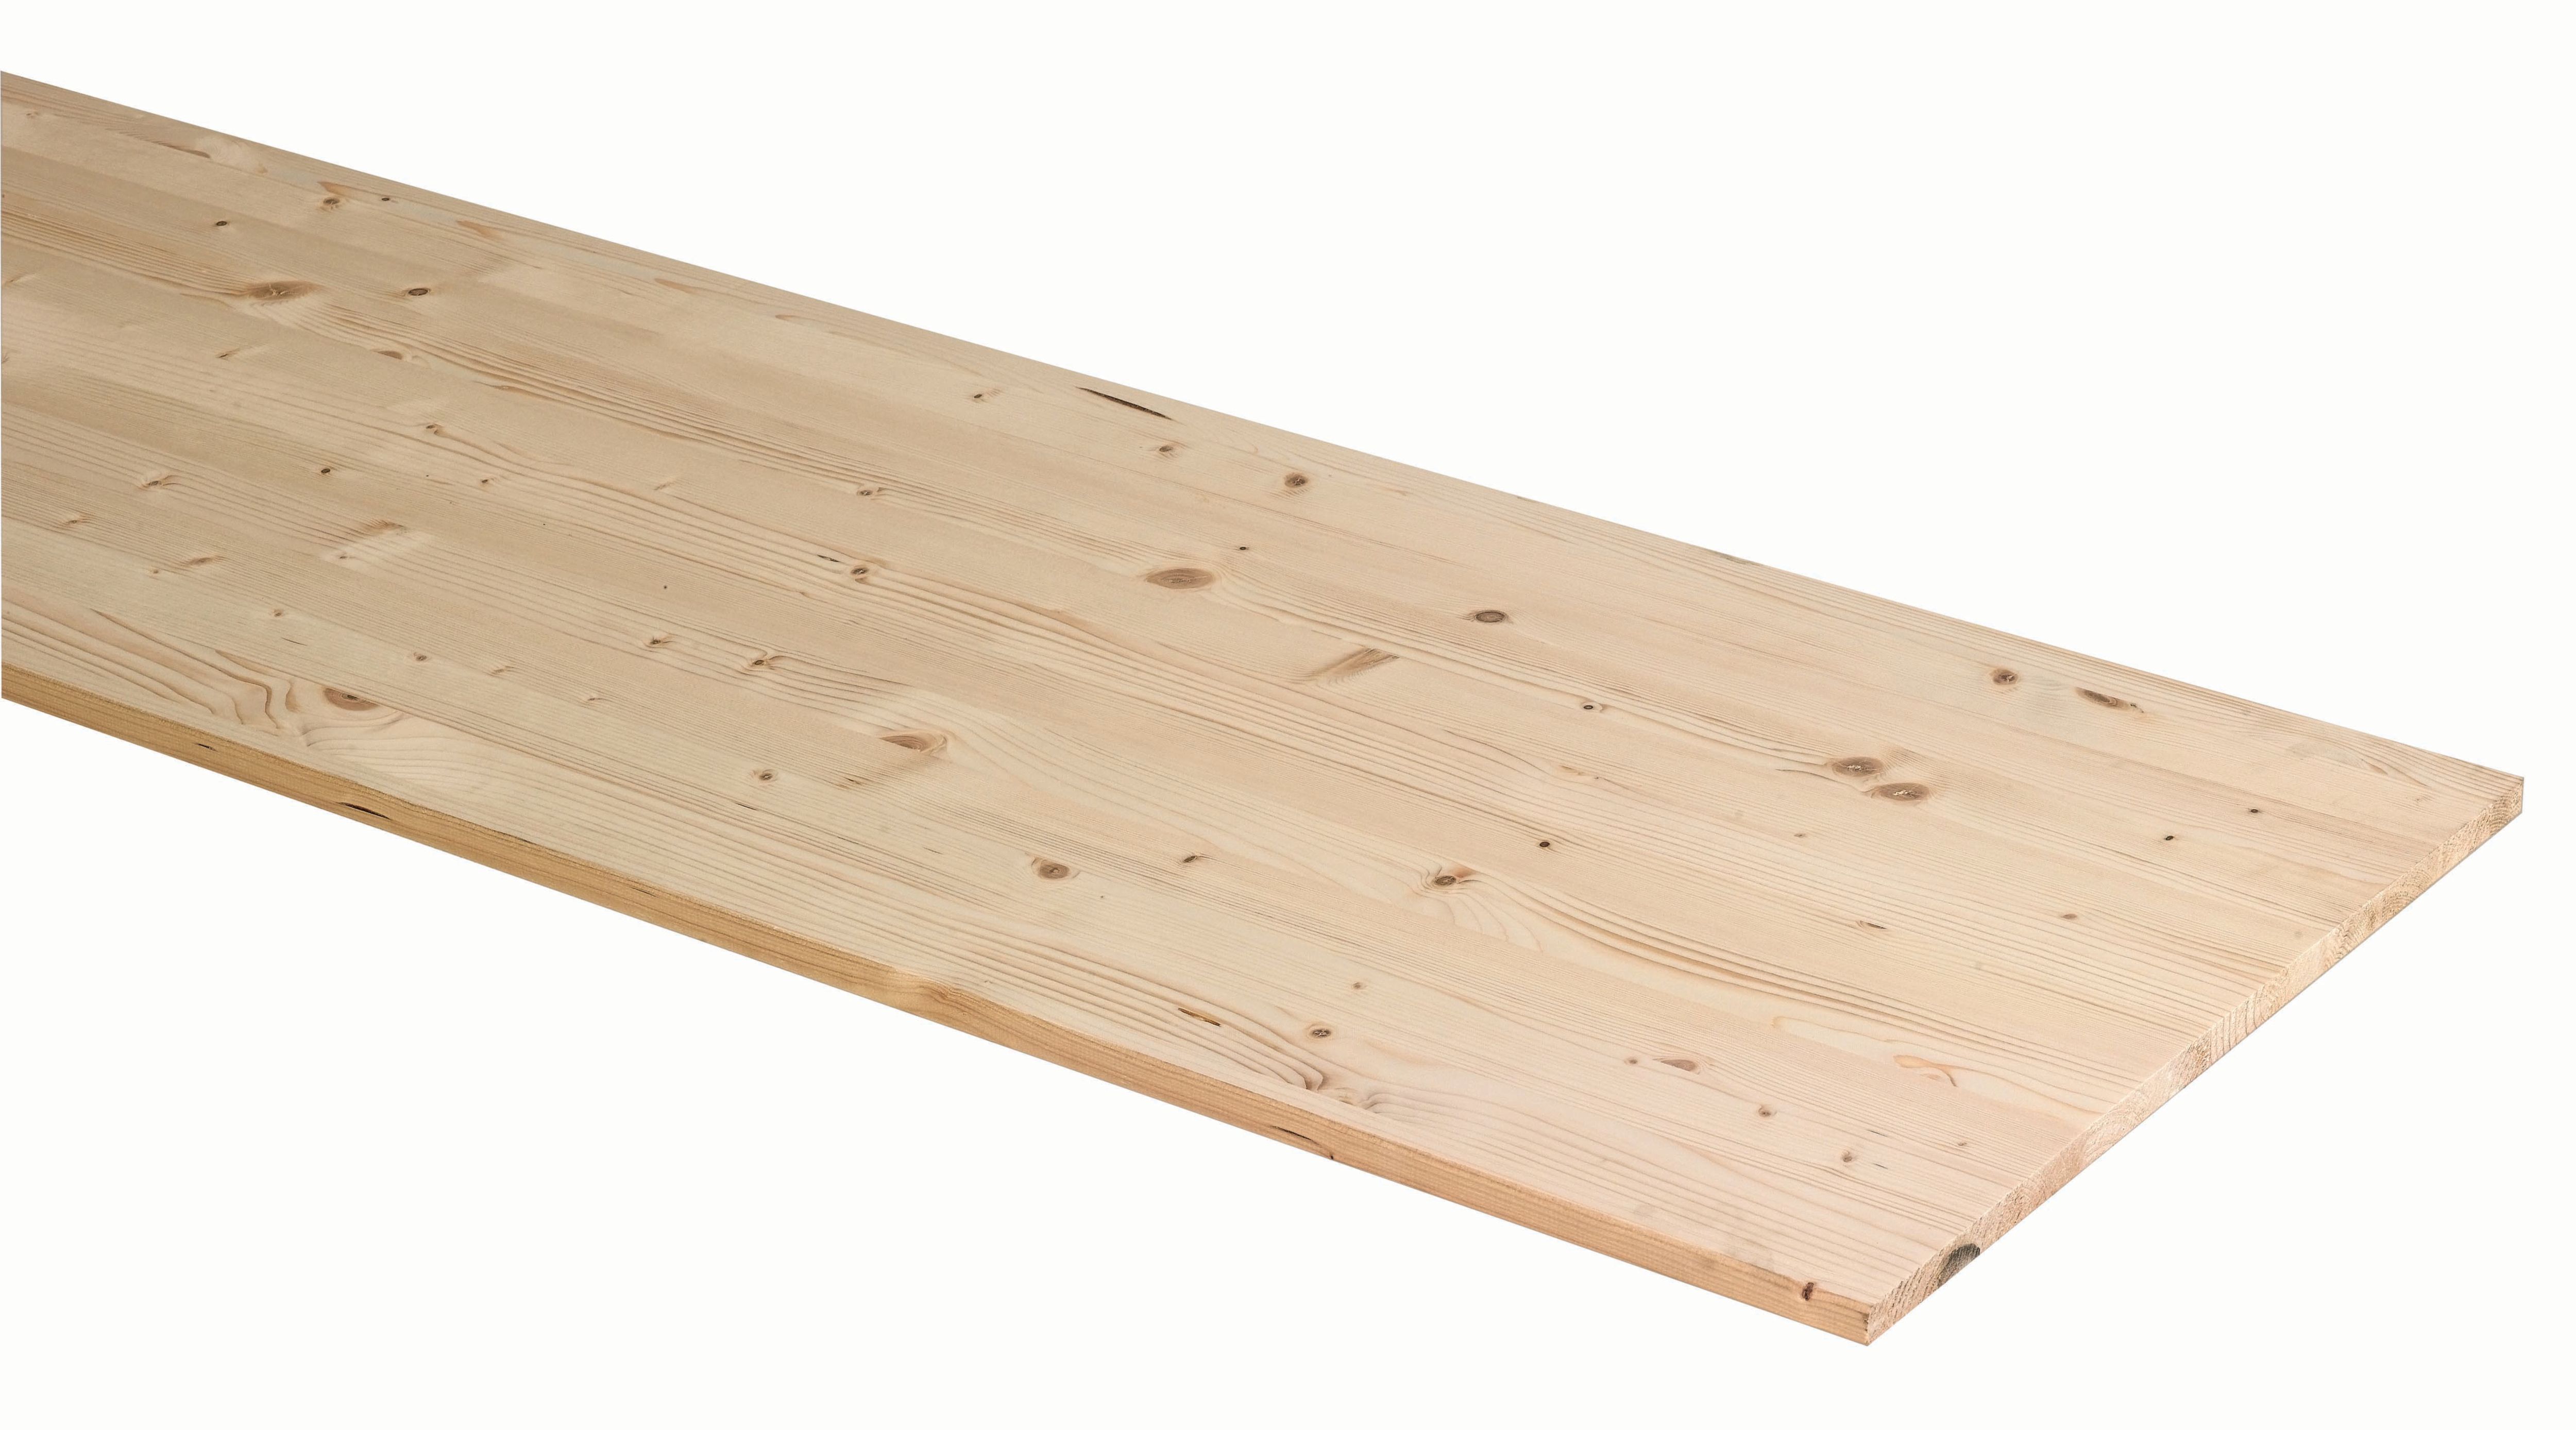 Image of Wickes General Purpose Spruce Timberboard - 18mm x 200mm x 2350mm